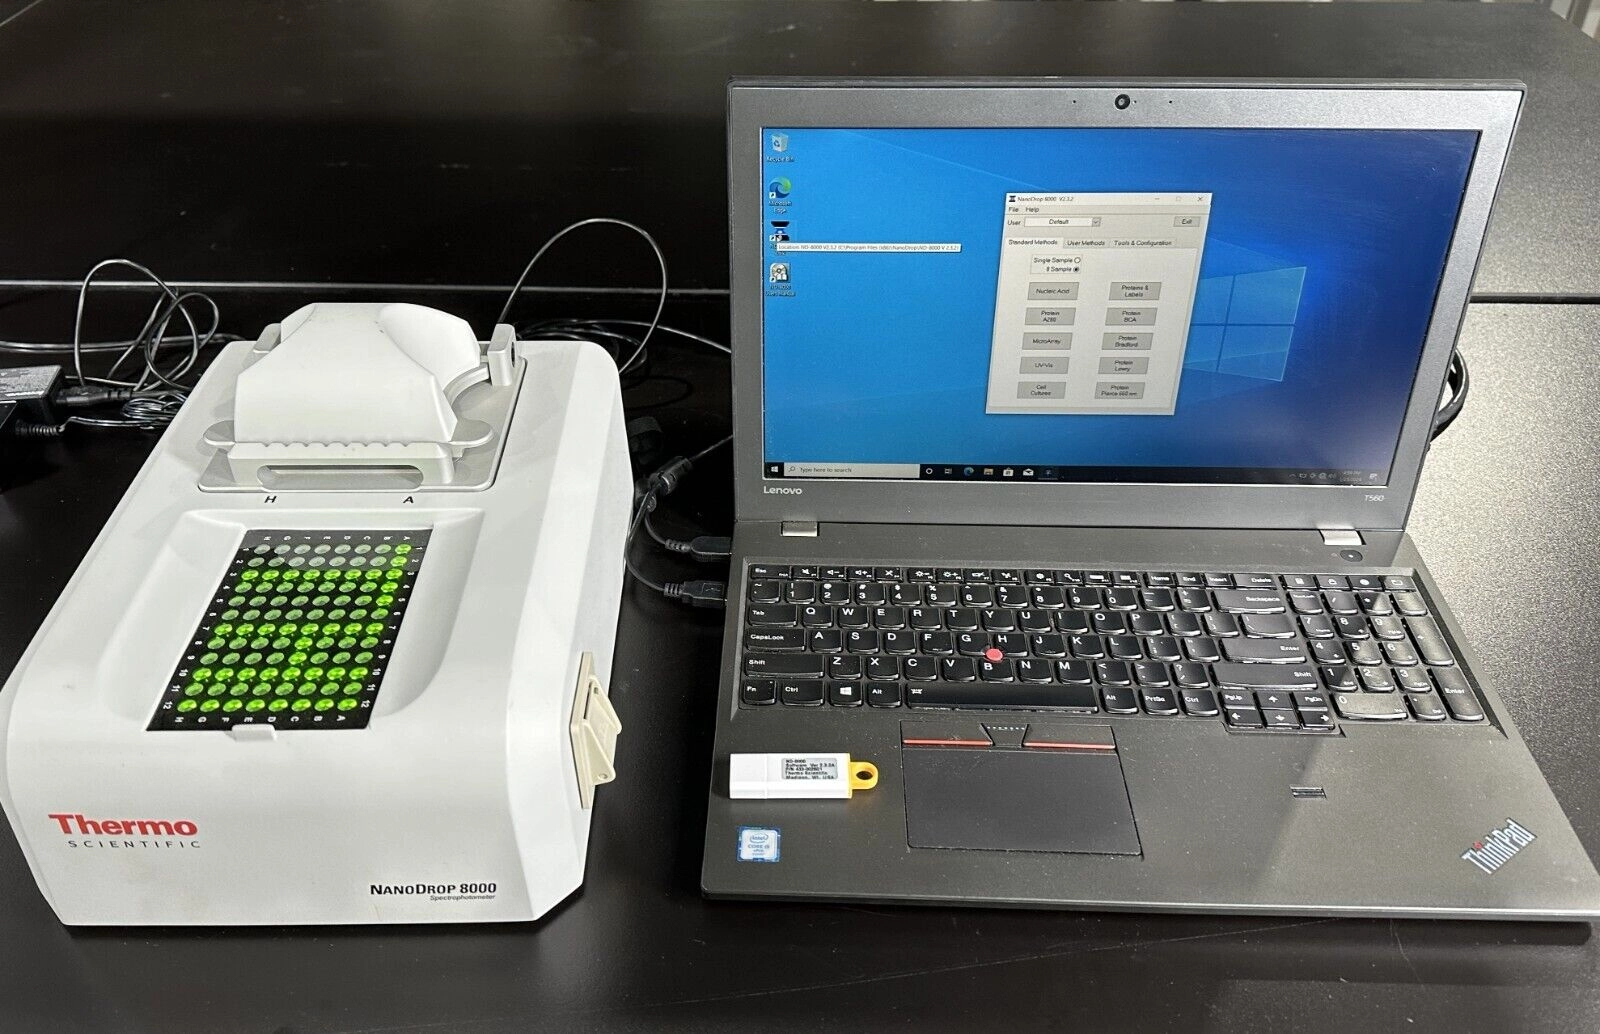 Thermo Scientific Nanodrop 8000 with laptop - Excellent